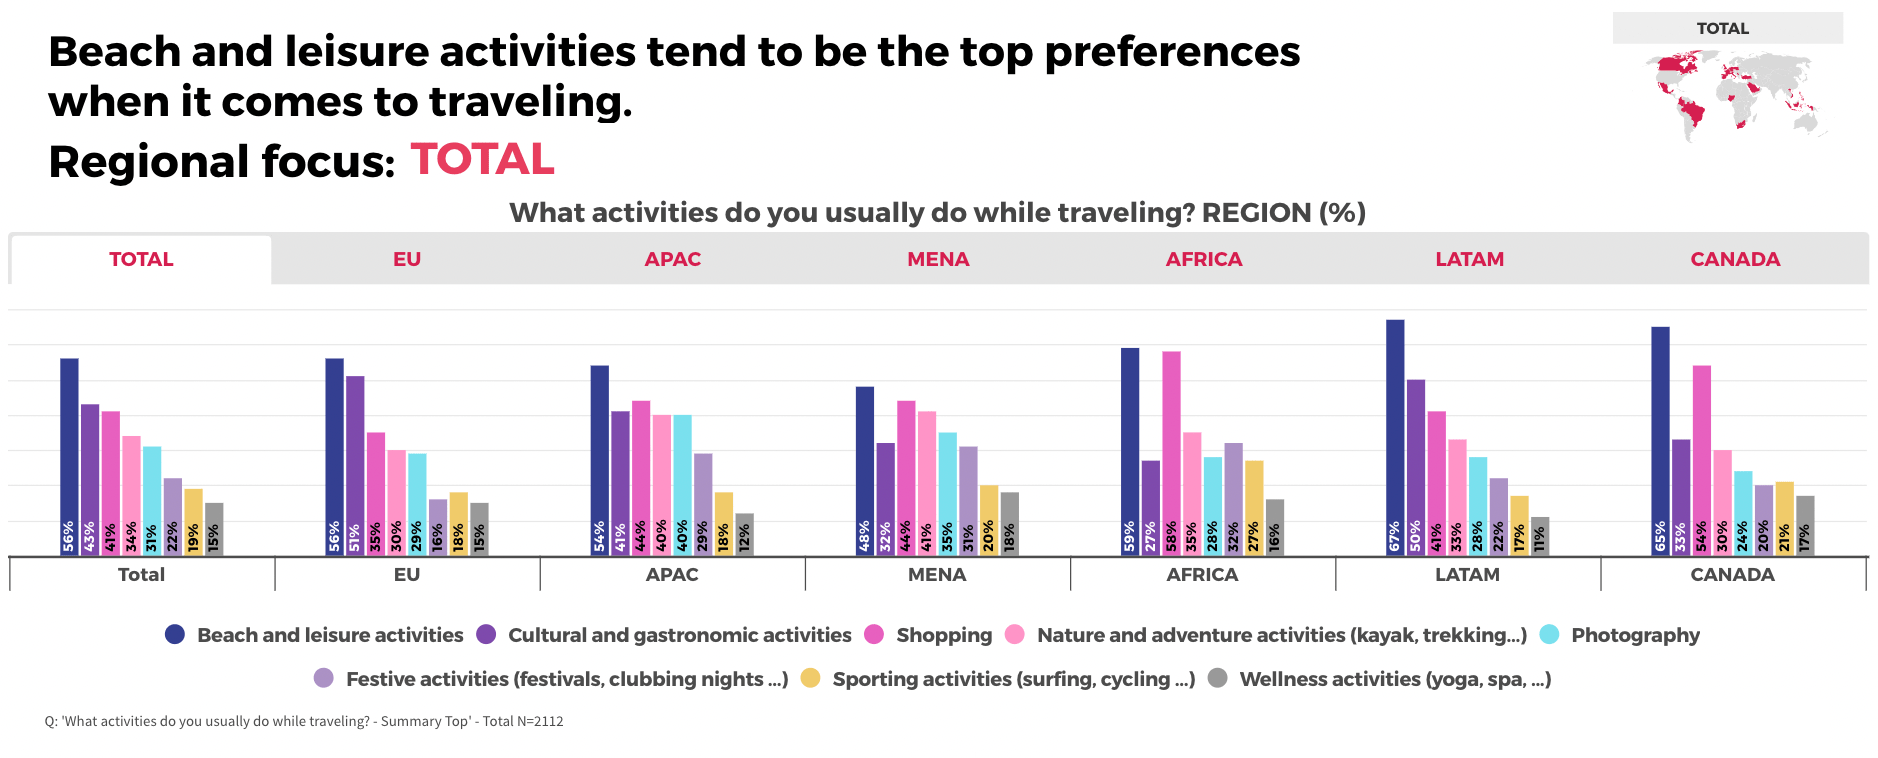 Beach and leisure activities tend to be the top preferences